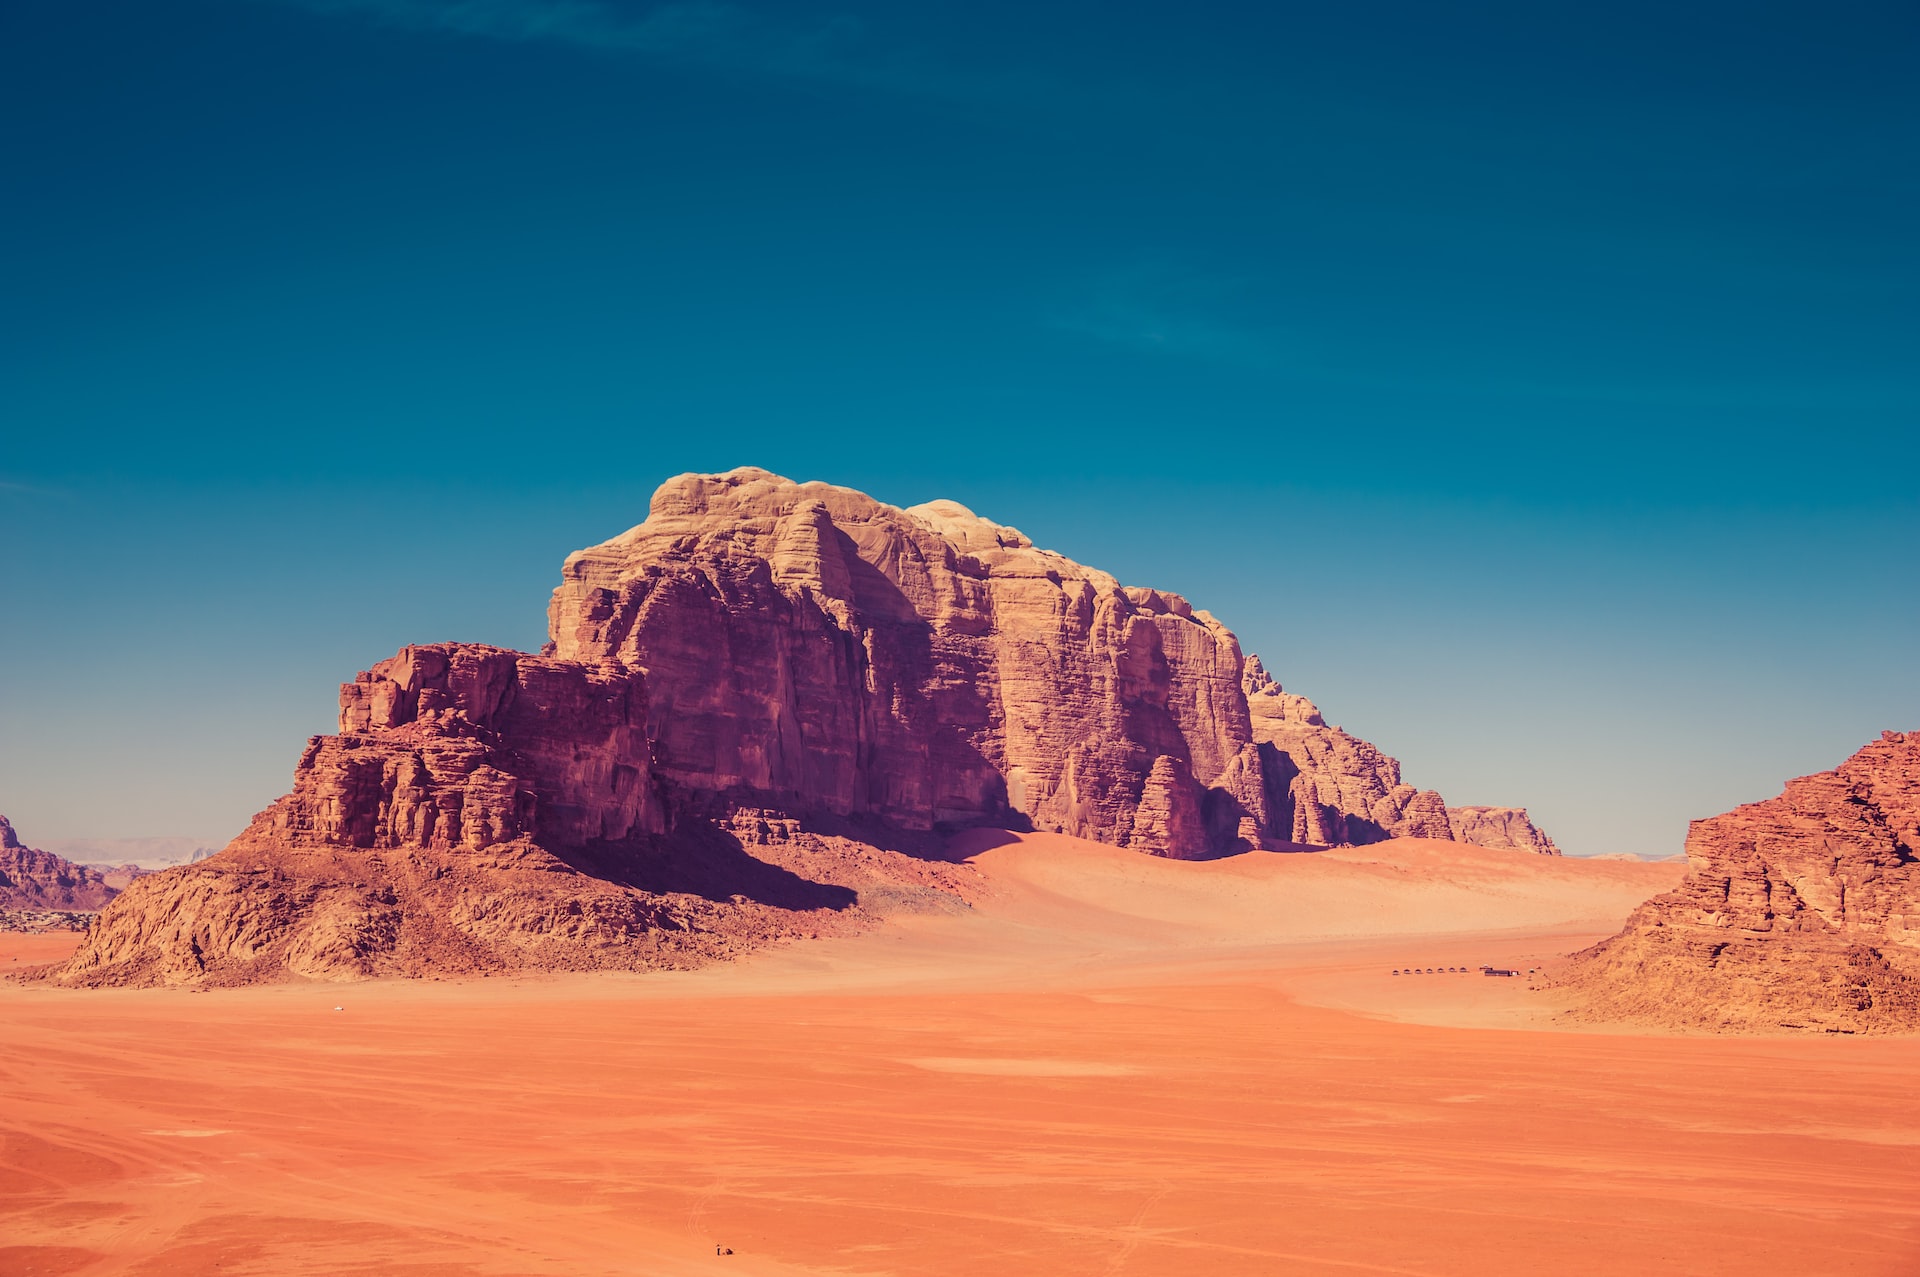 How to Get from Petra to Wadi Rum- The Martian landscape of Wadi Rum